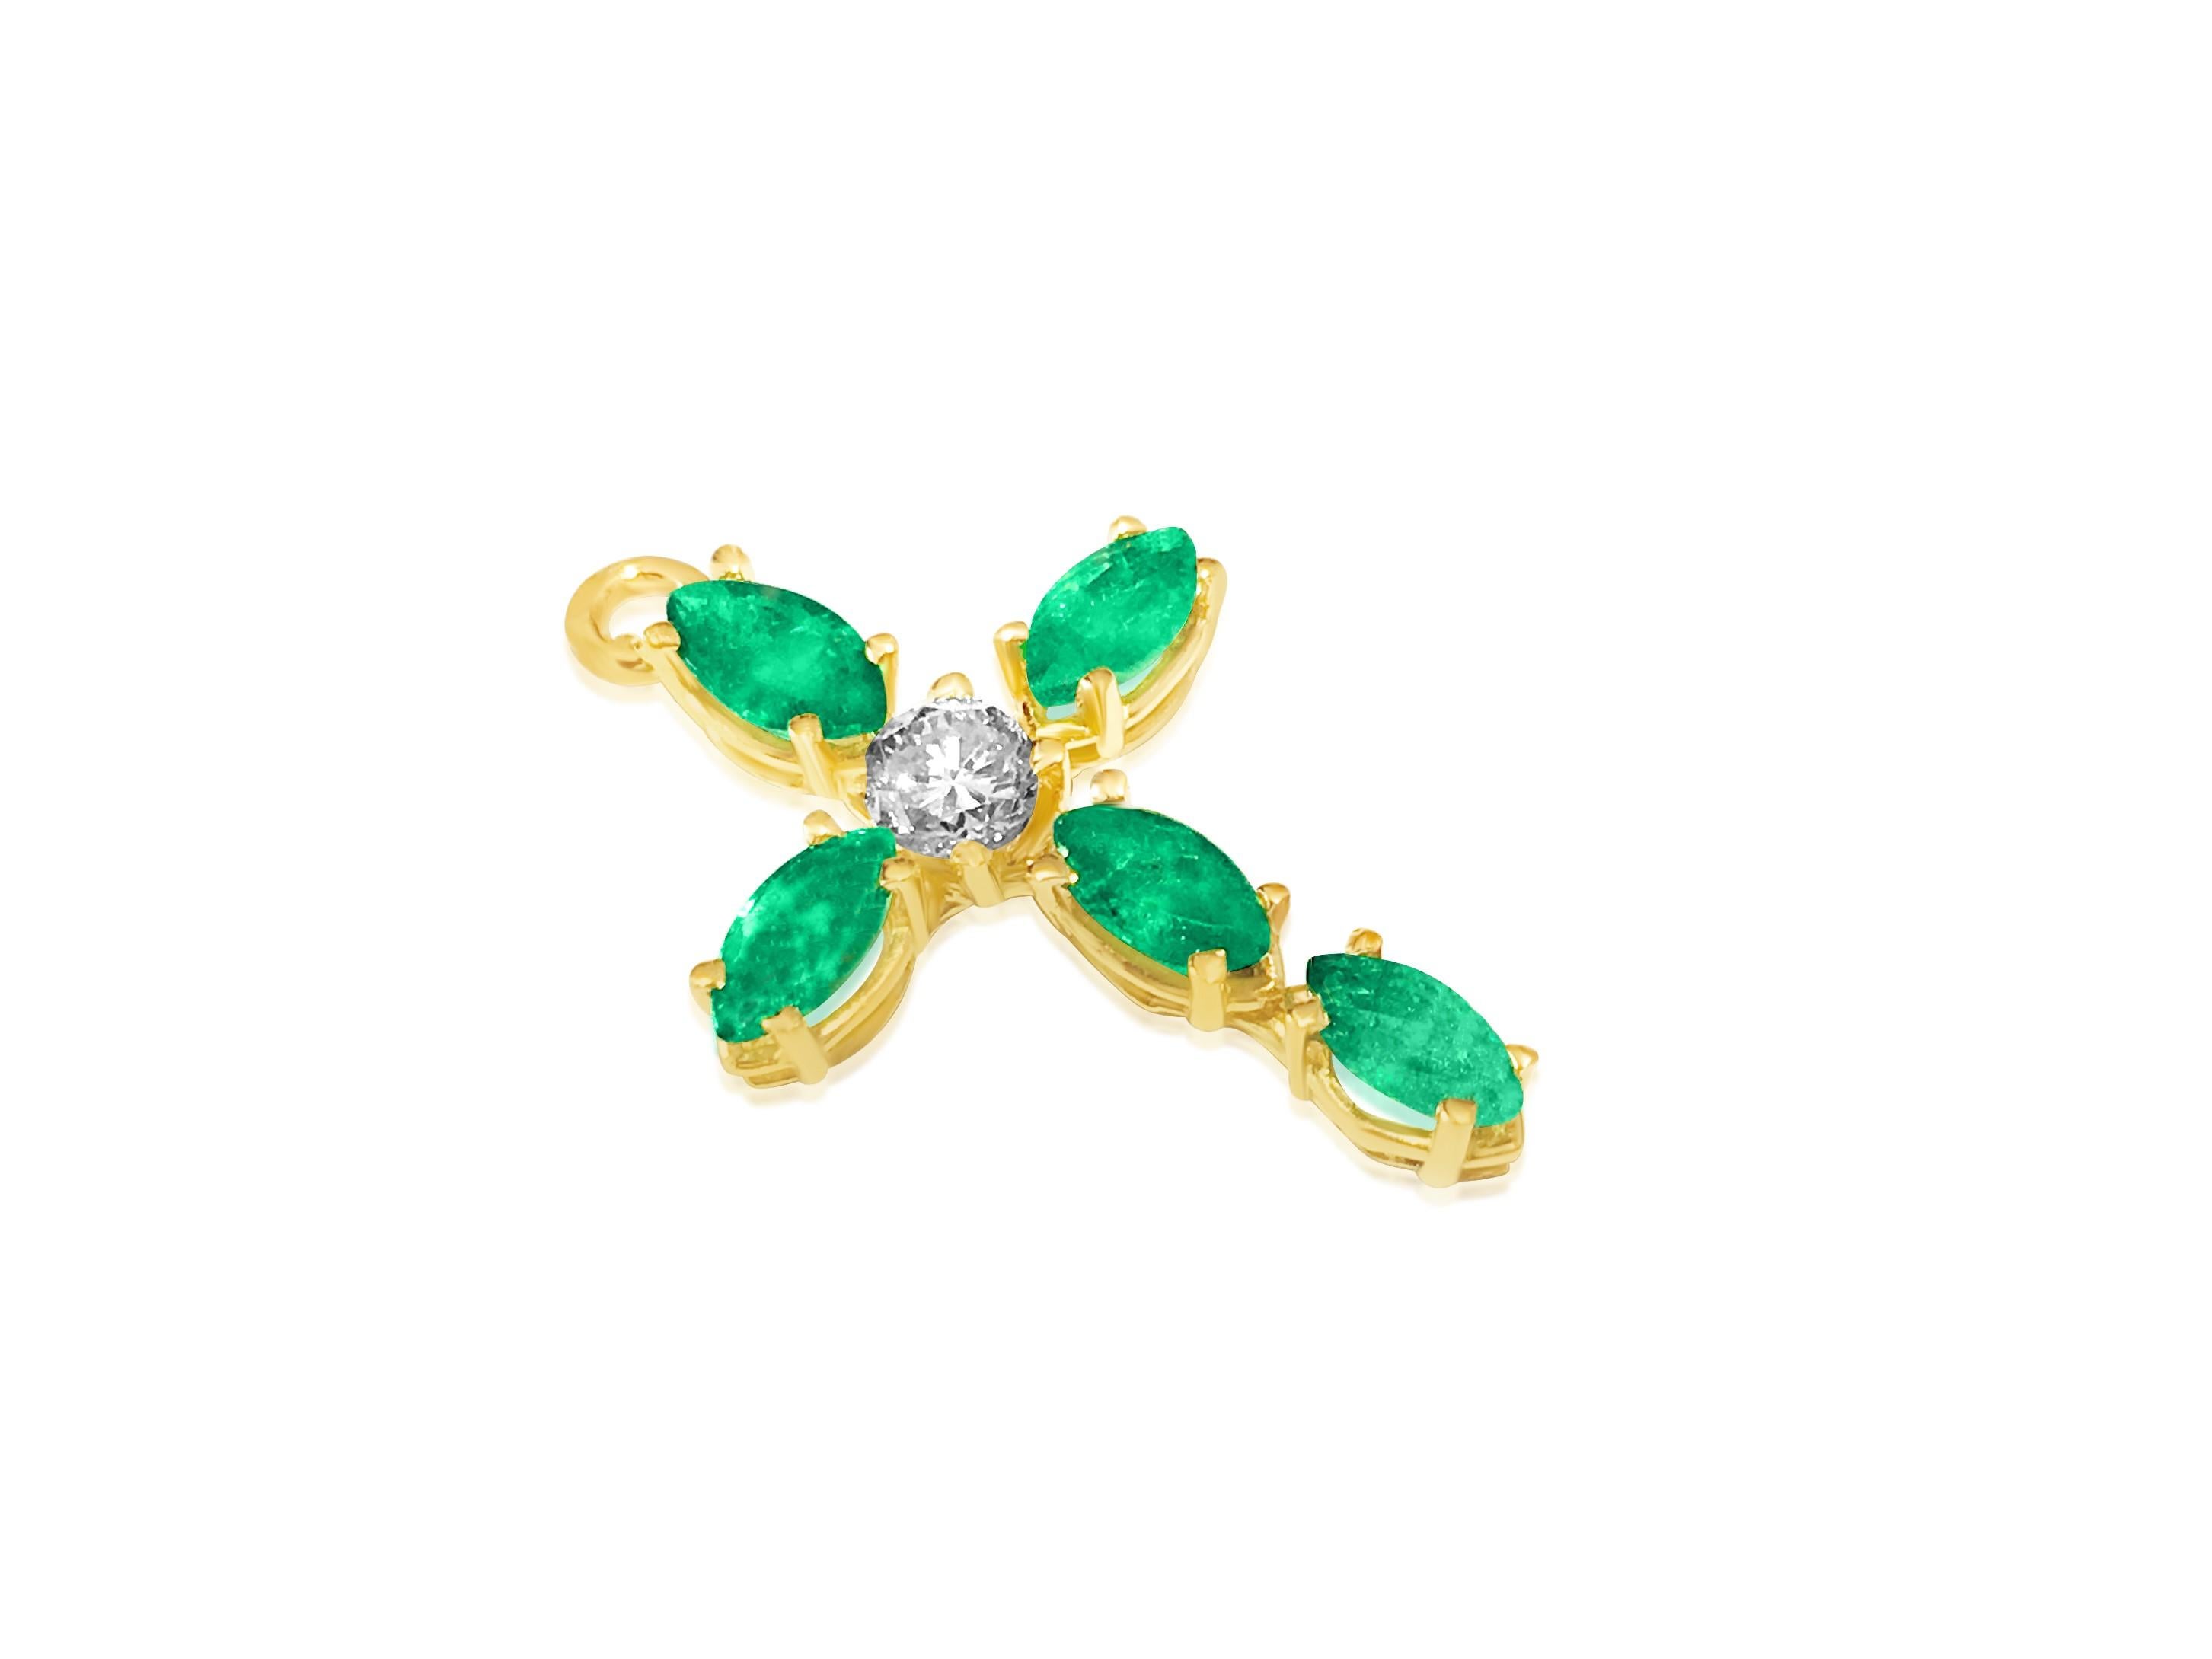 Presenting a stunning pendant cross crafted from 14k yellow gold, adorned with a 0.35 carat round brilliant-cut diamond and 0.60 carats of marquise-cut emeralds, all 100% natural earth mined and genuine. With SI1 clarity and G color for the diamond,